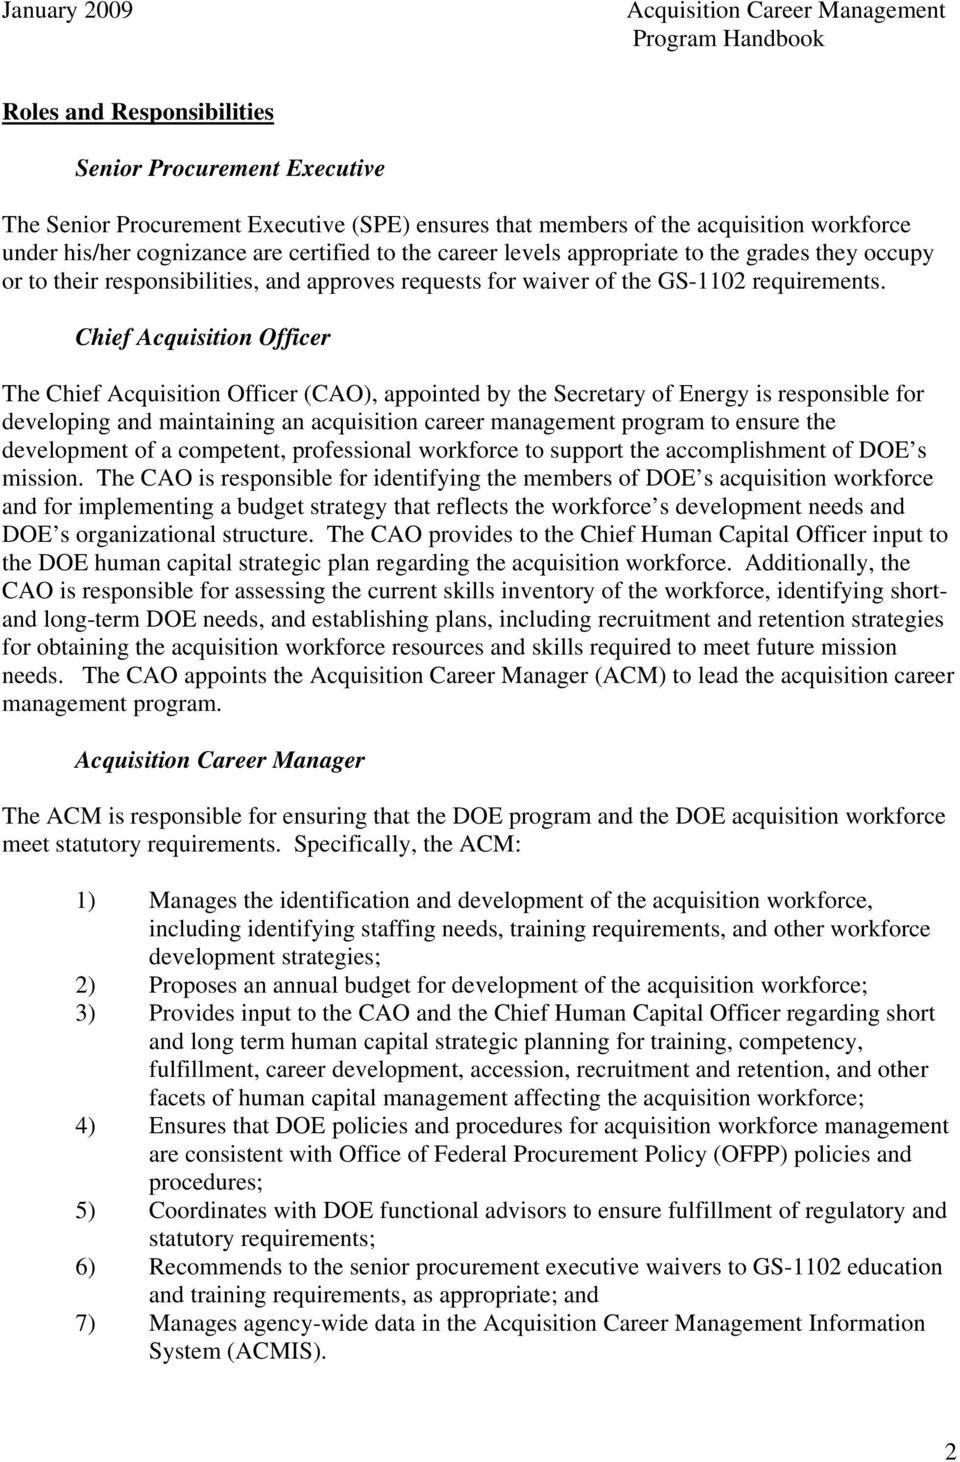 Chief Acquisition Officer The Chief Acquisition Officer (CAO), appointed by the Secretary of Energy is responsible for developing and maintaining an acquisition career management program to ensure